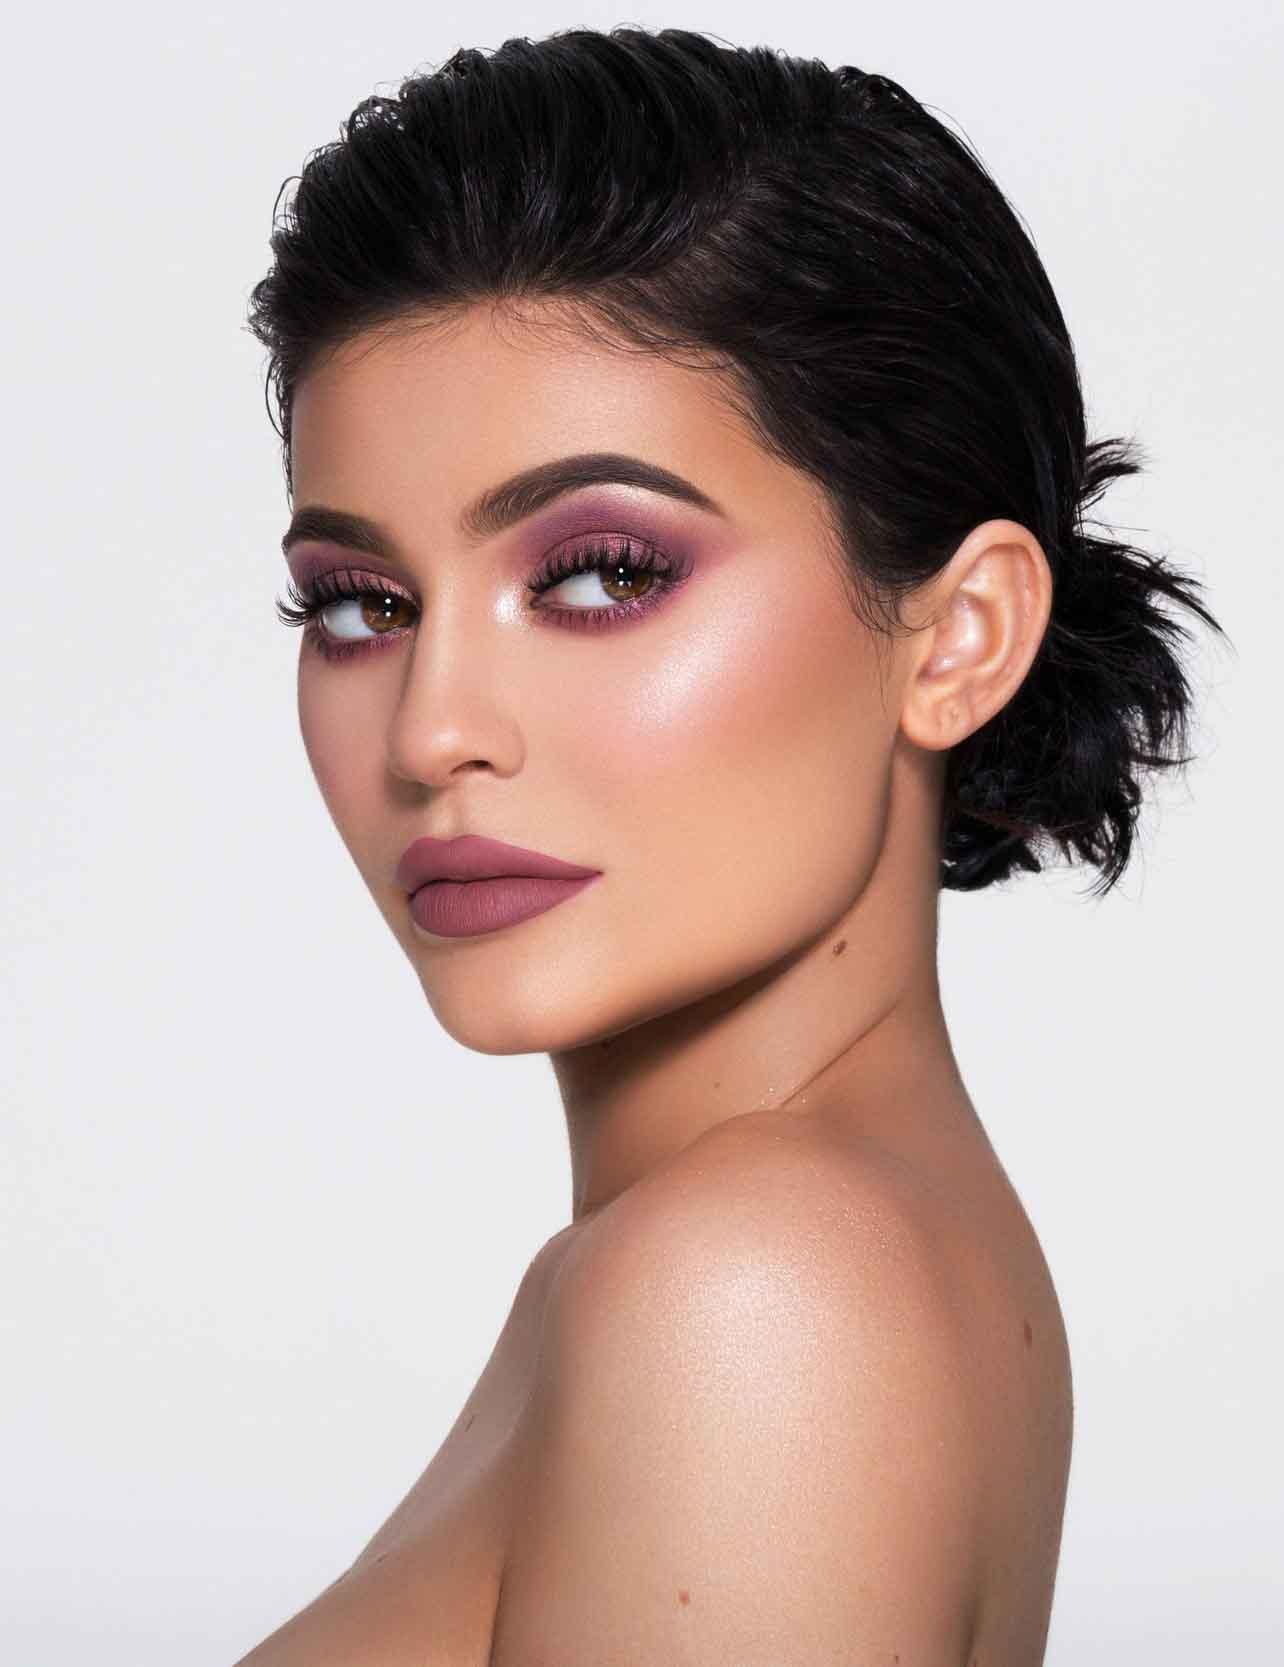 Kylie Jenner Wallpapers HD para Android - APK Descargar